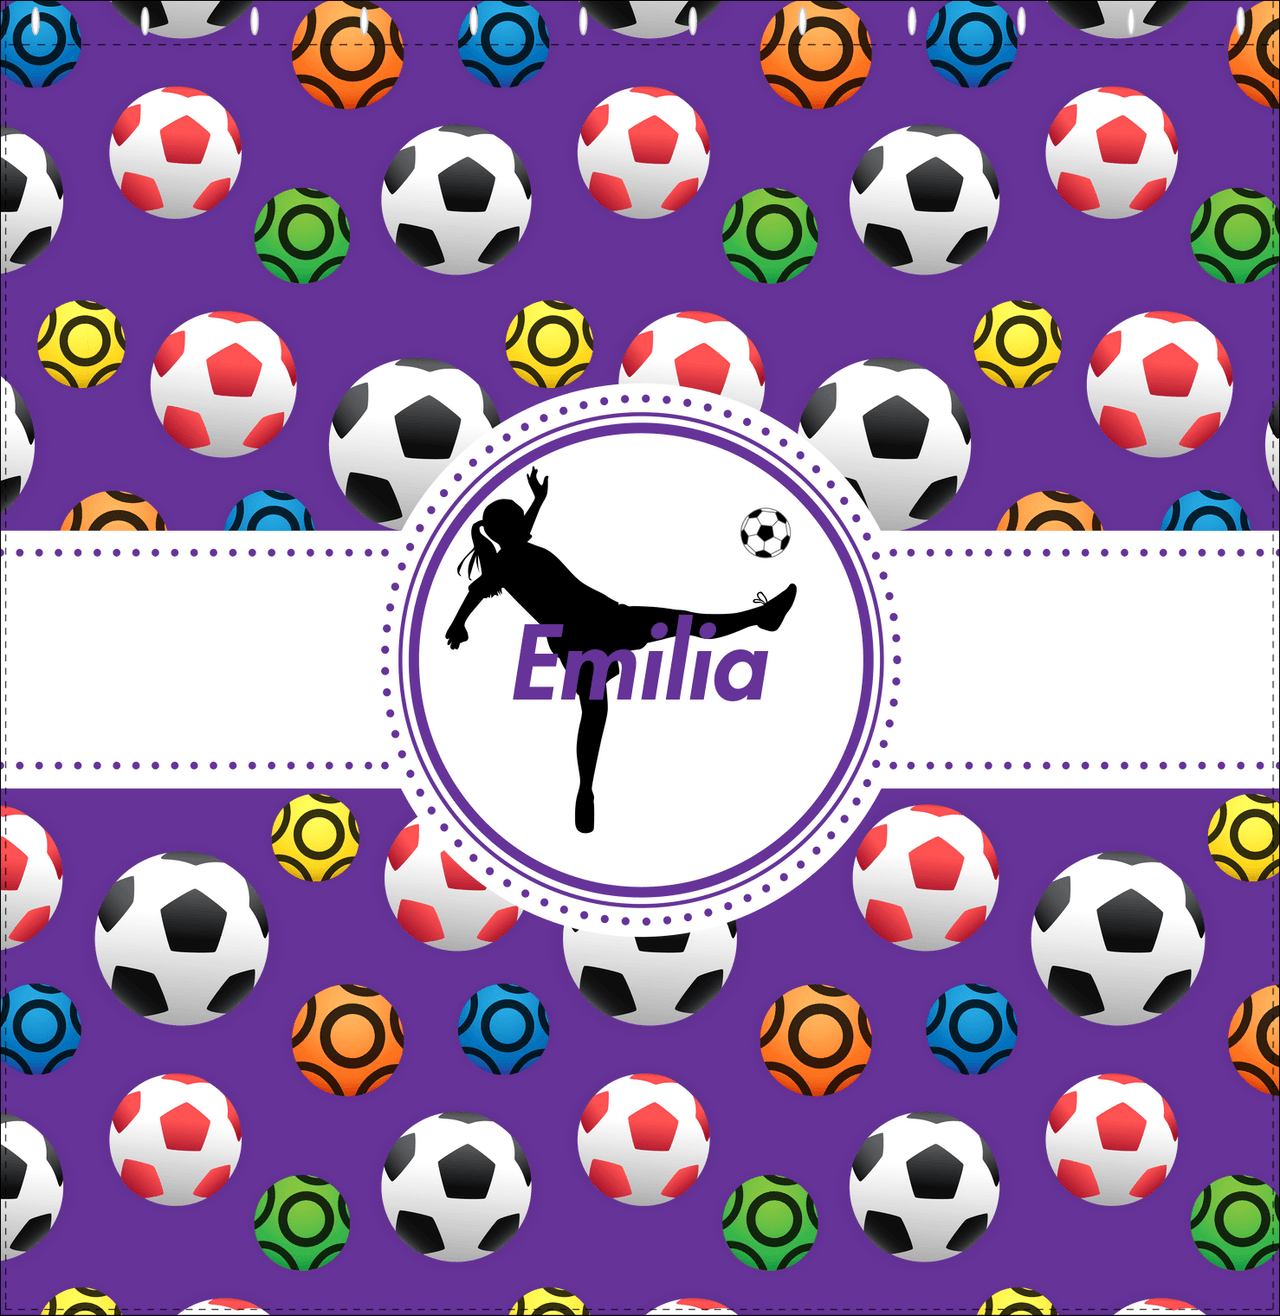 Personalized Soccer Shower Curtain XLVIII - Purple Background - Girl Silhouette I - Decorate View